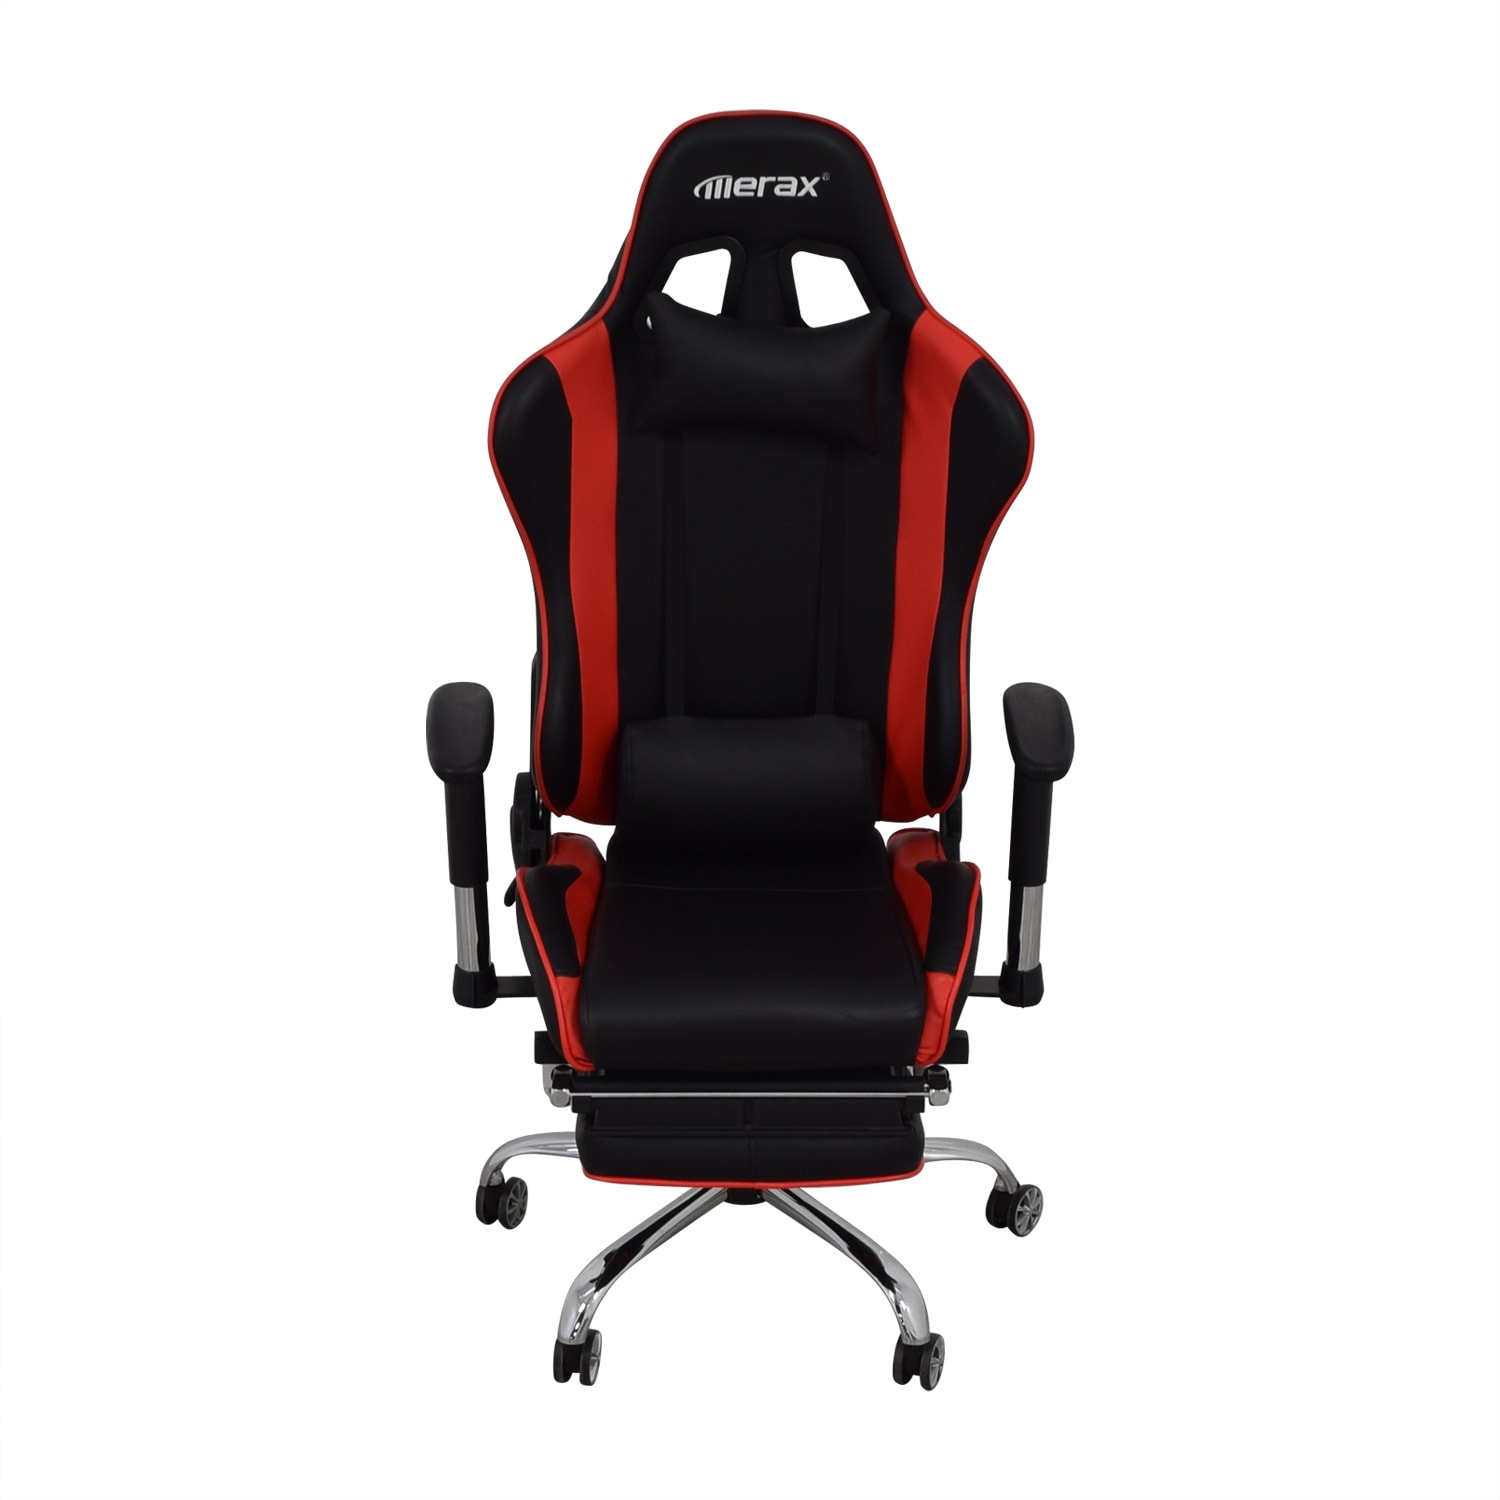 https://res.cloudinary.com/dkqtxtobb/image/upload/f_auto,q_auto:best,w_1500/product-assets/49518/merax/chairs/home-office-chairs/merax-black-and-red-recliner-gaming-chair-with-footrest-second-hand.jpeg